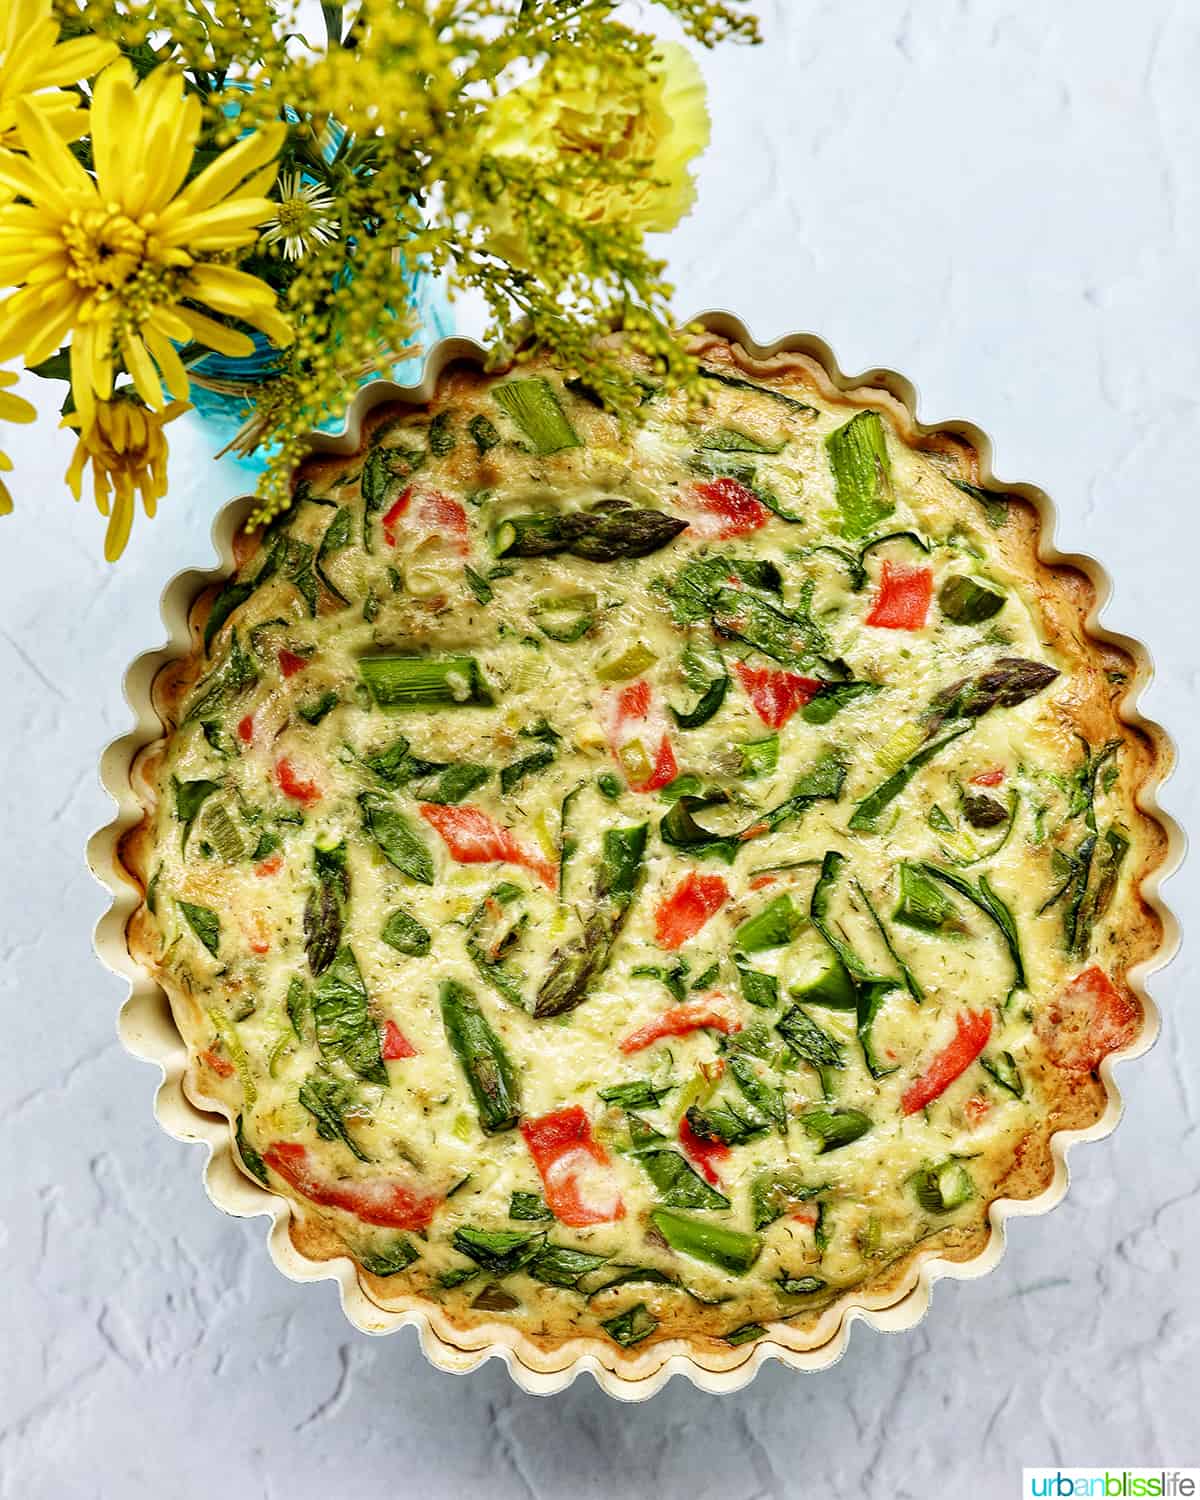 A quiche in a pie pan with salmon, asparagus, and leeks in front of a vase of yellow flowers.